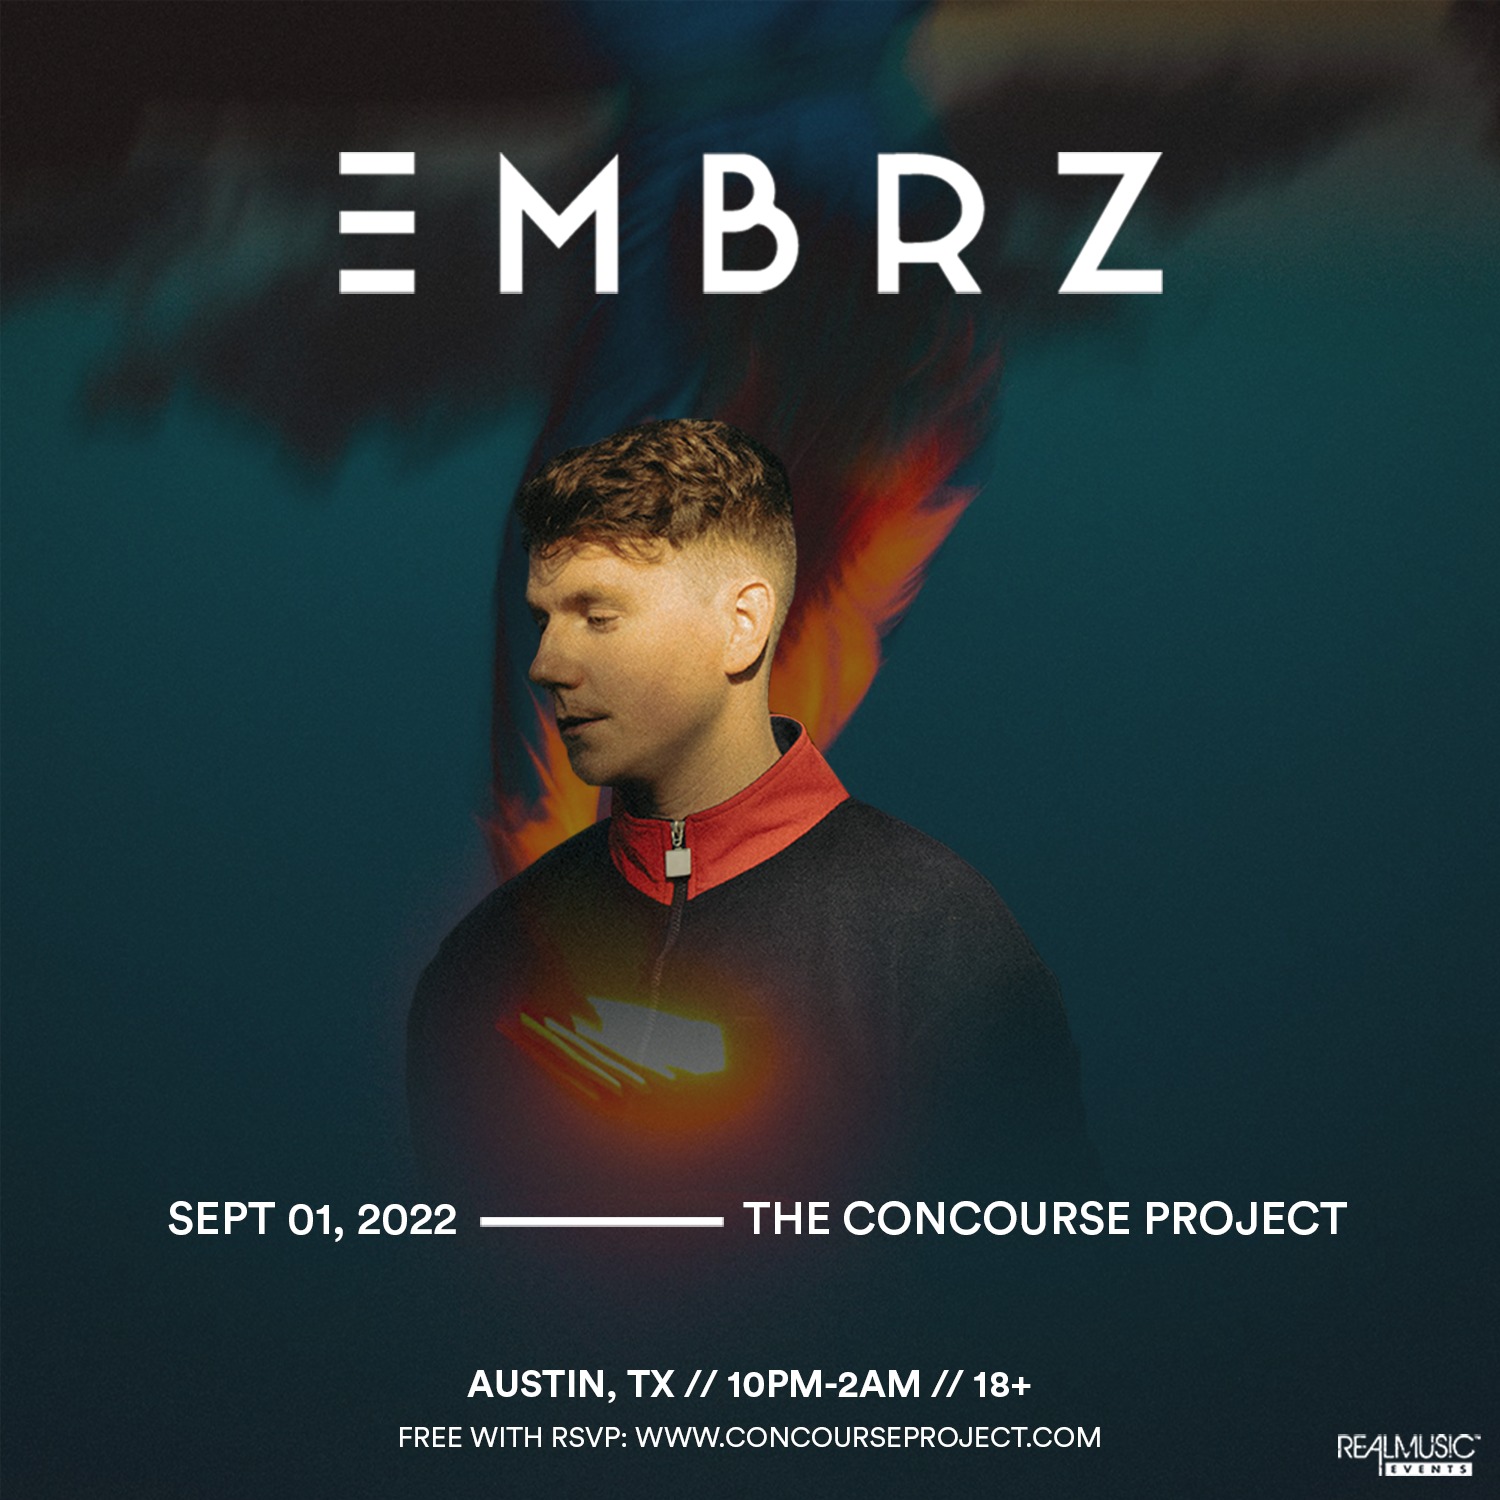 FREE WITH RSVP: EMBRZ at The Concourse Project